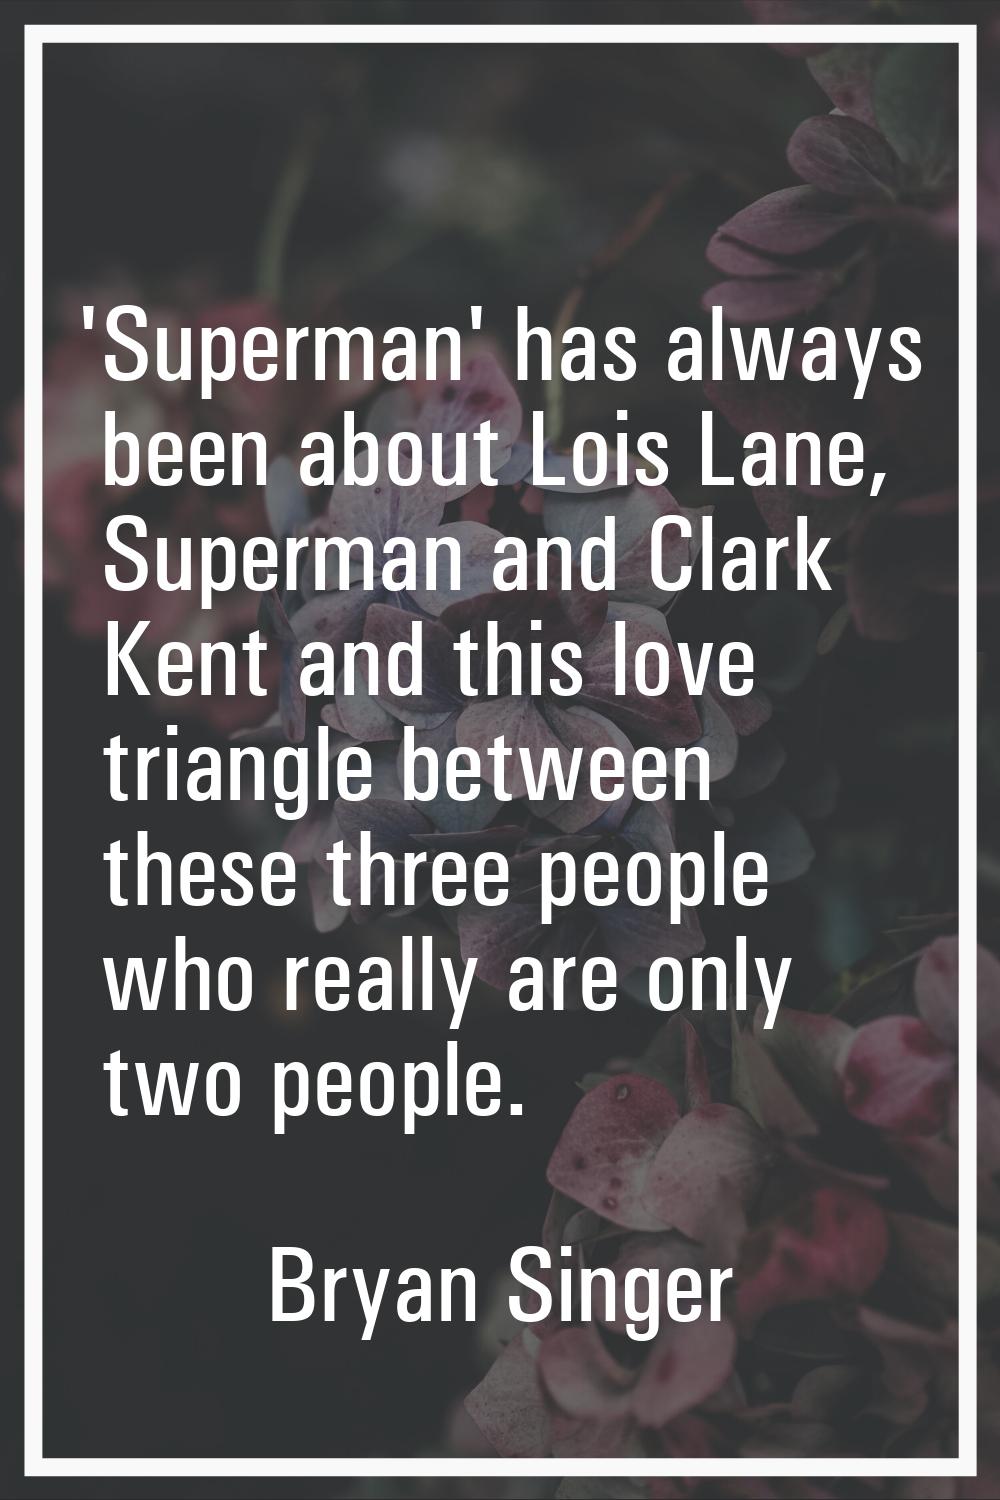 'Superman' has always been about Lois Lane, Superman and Clark Kent and this love triangle between 